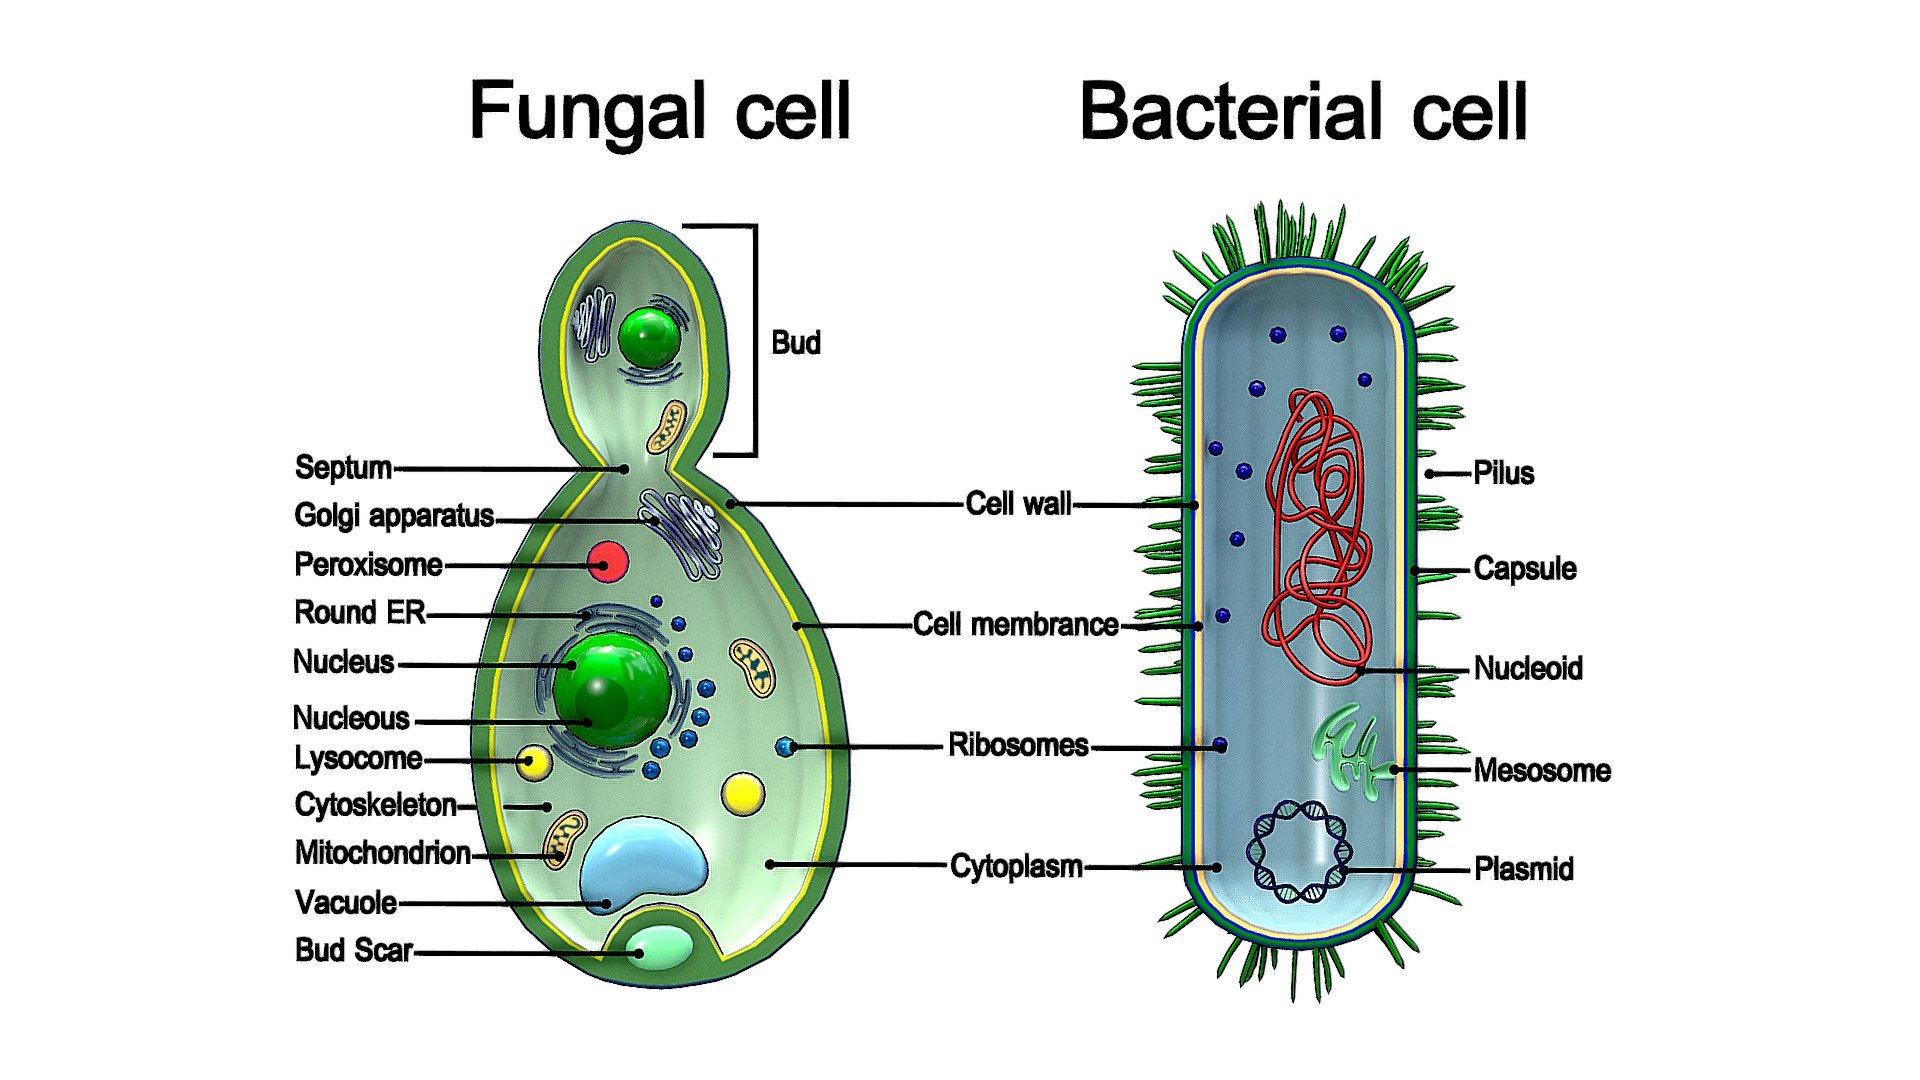 Yeasts, unlike bacteria, are eukaryotic. As a result, they cannot be classified as bacteria and instead belong to the fungi group. Yeast is a fungus that grows as a single cell, not as a mushroom. Despite the fact that each yeast organism is made up of only one cell, yeast cells coexist in multicellular colonies 3d model